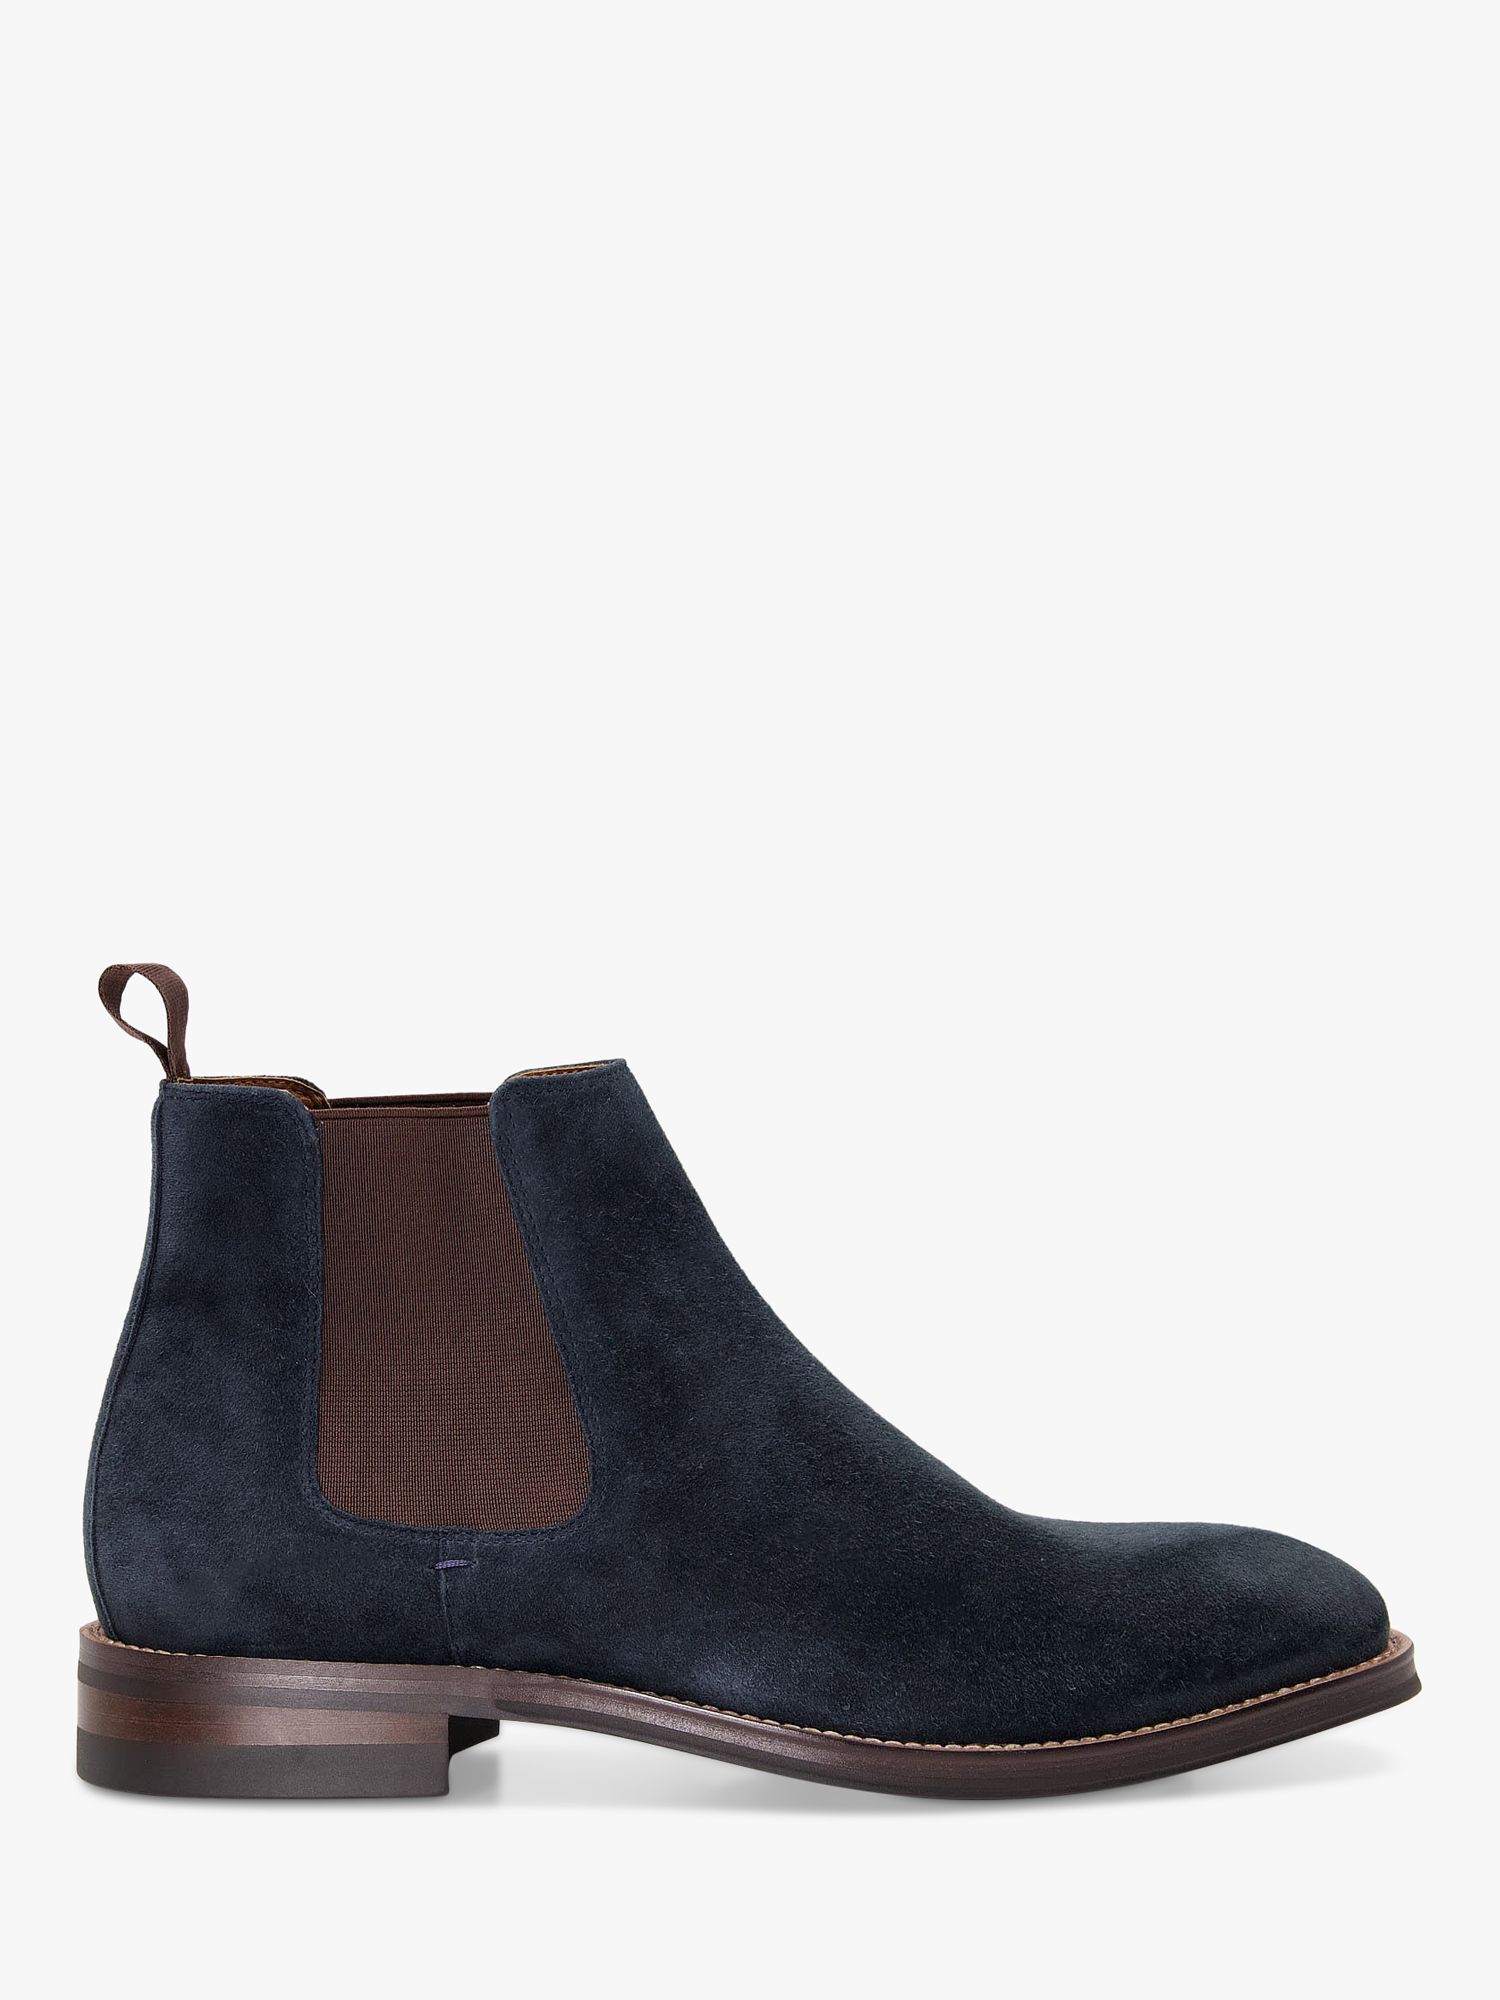 Dune Masons Suede Chelsea Boots, Navy at John Lewis & Partners